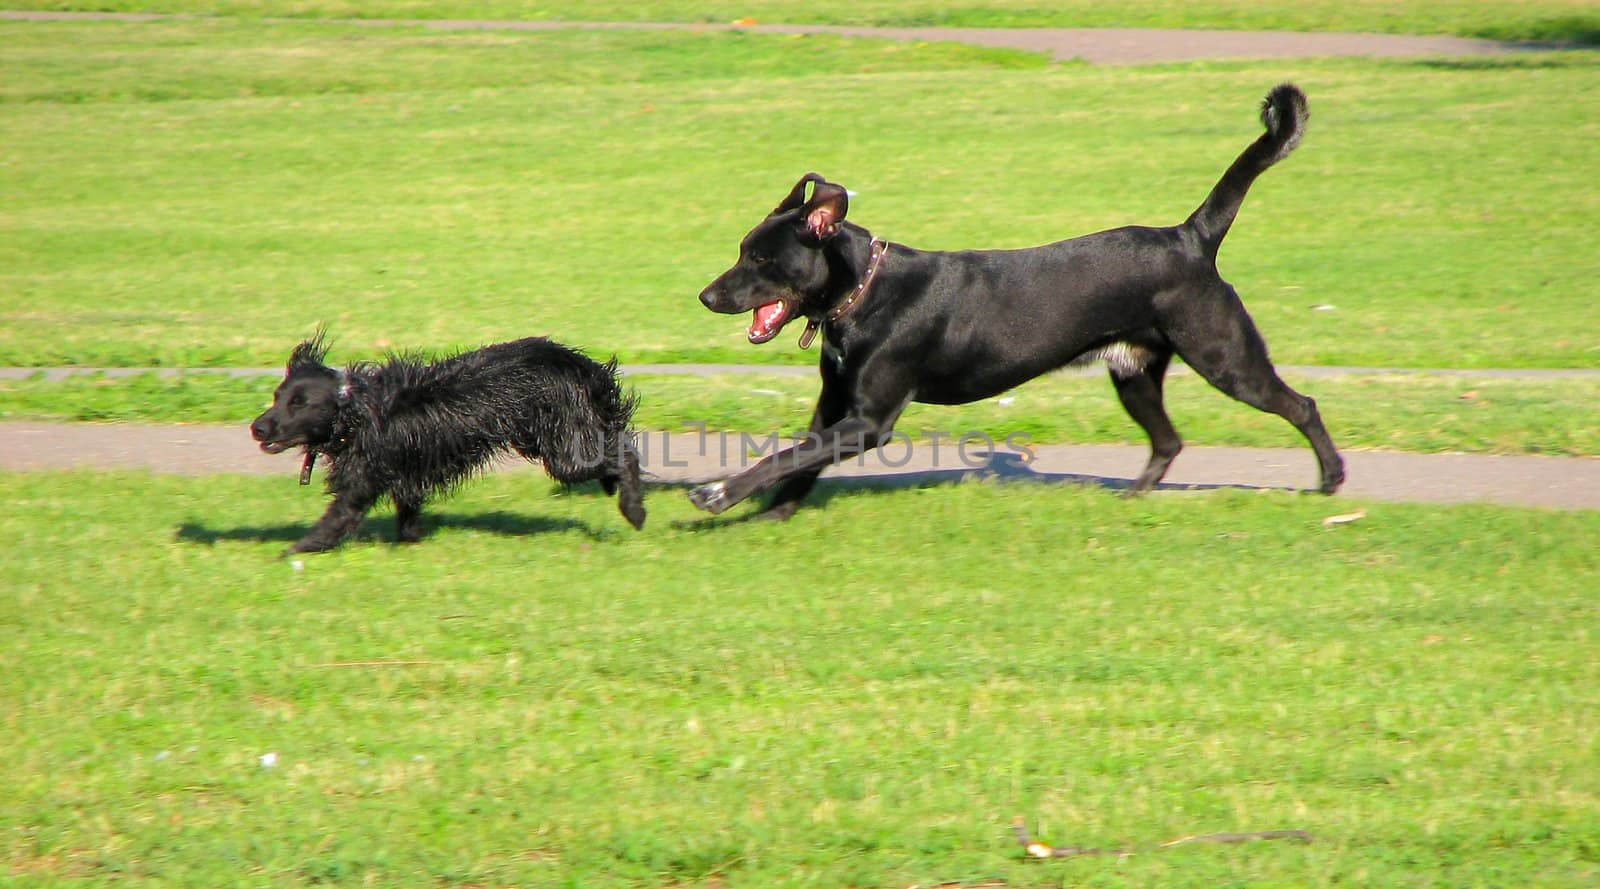 Two black dogs running